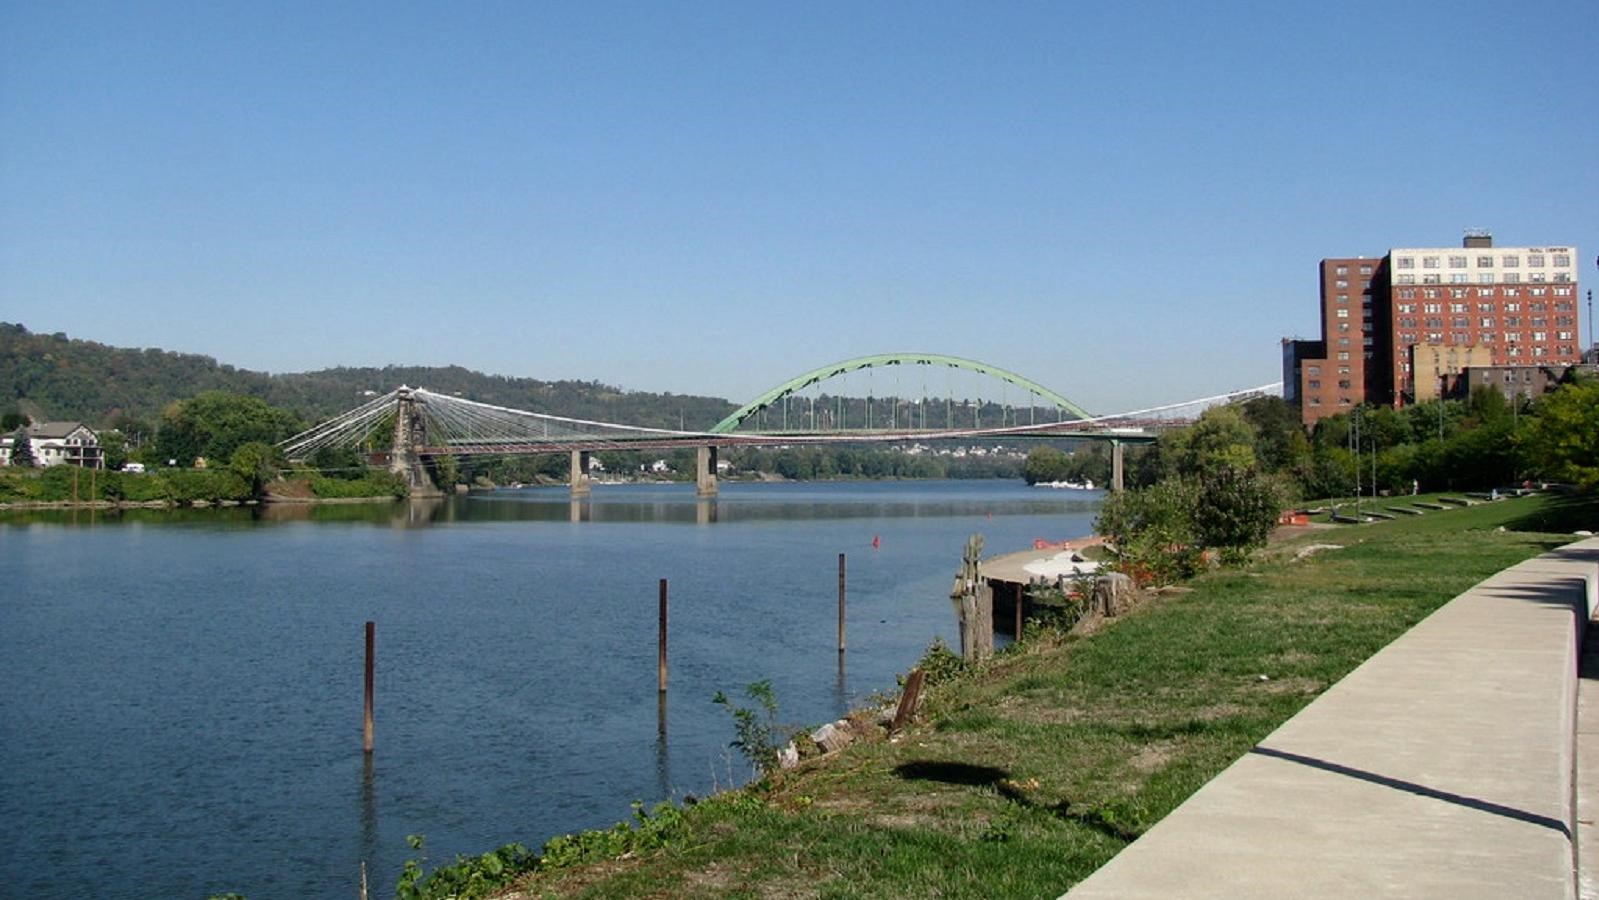 A suspenion bridge crosses a wide river, stretching from one grassy bank to the other